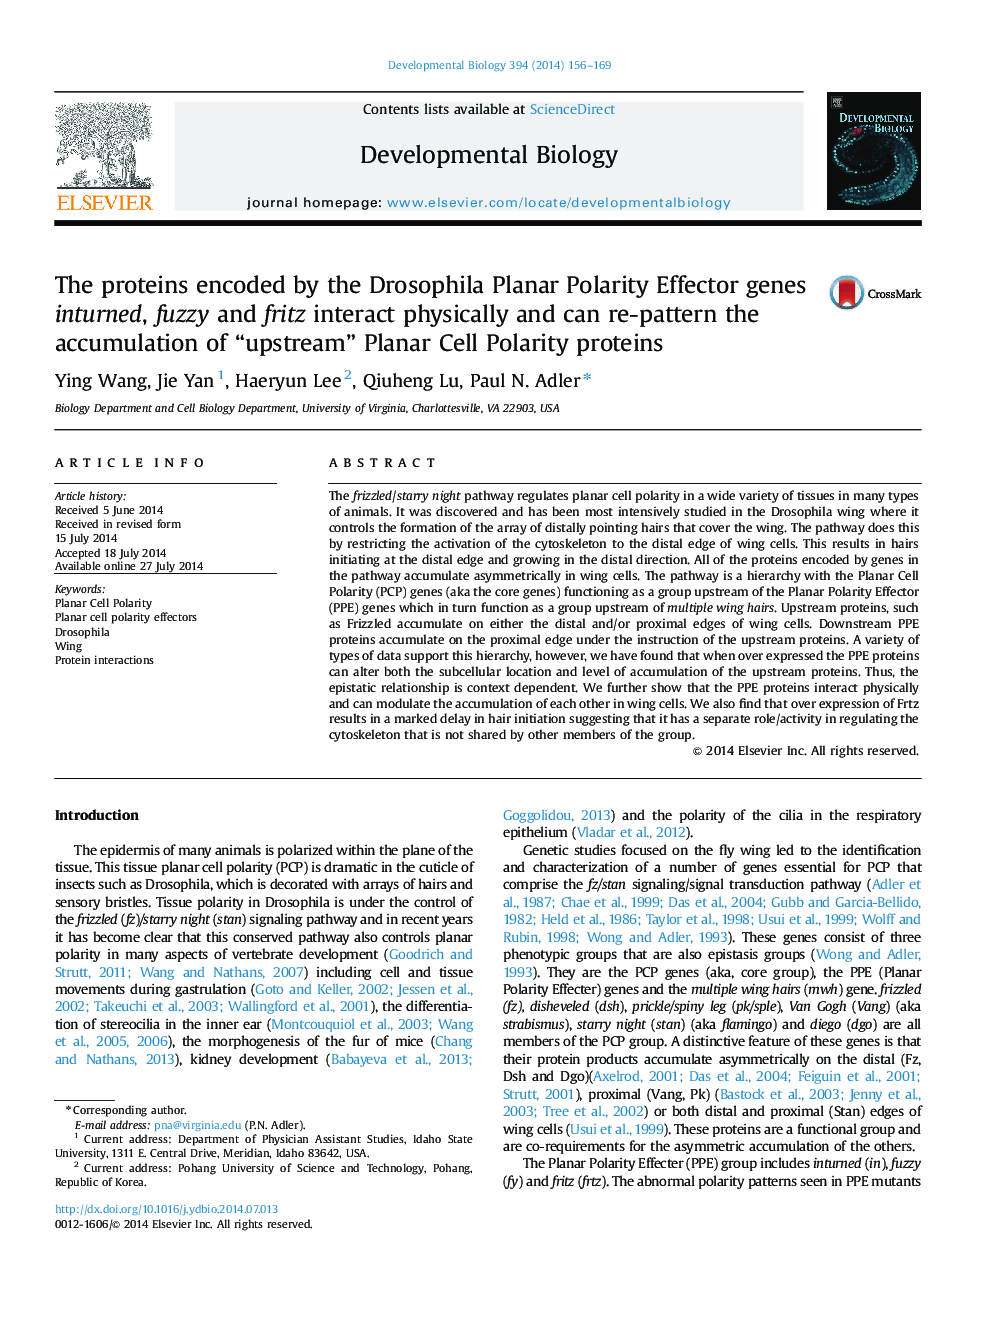 The proteins encoded by the Drosophila Planar Polarity Effector genes inturned, fuzzy and fritz interact physically and can re-pattern the accumulation of “upstream” Planar Cell Polarity proteins